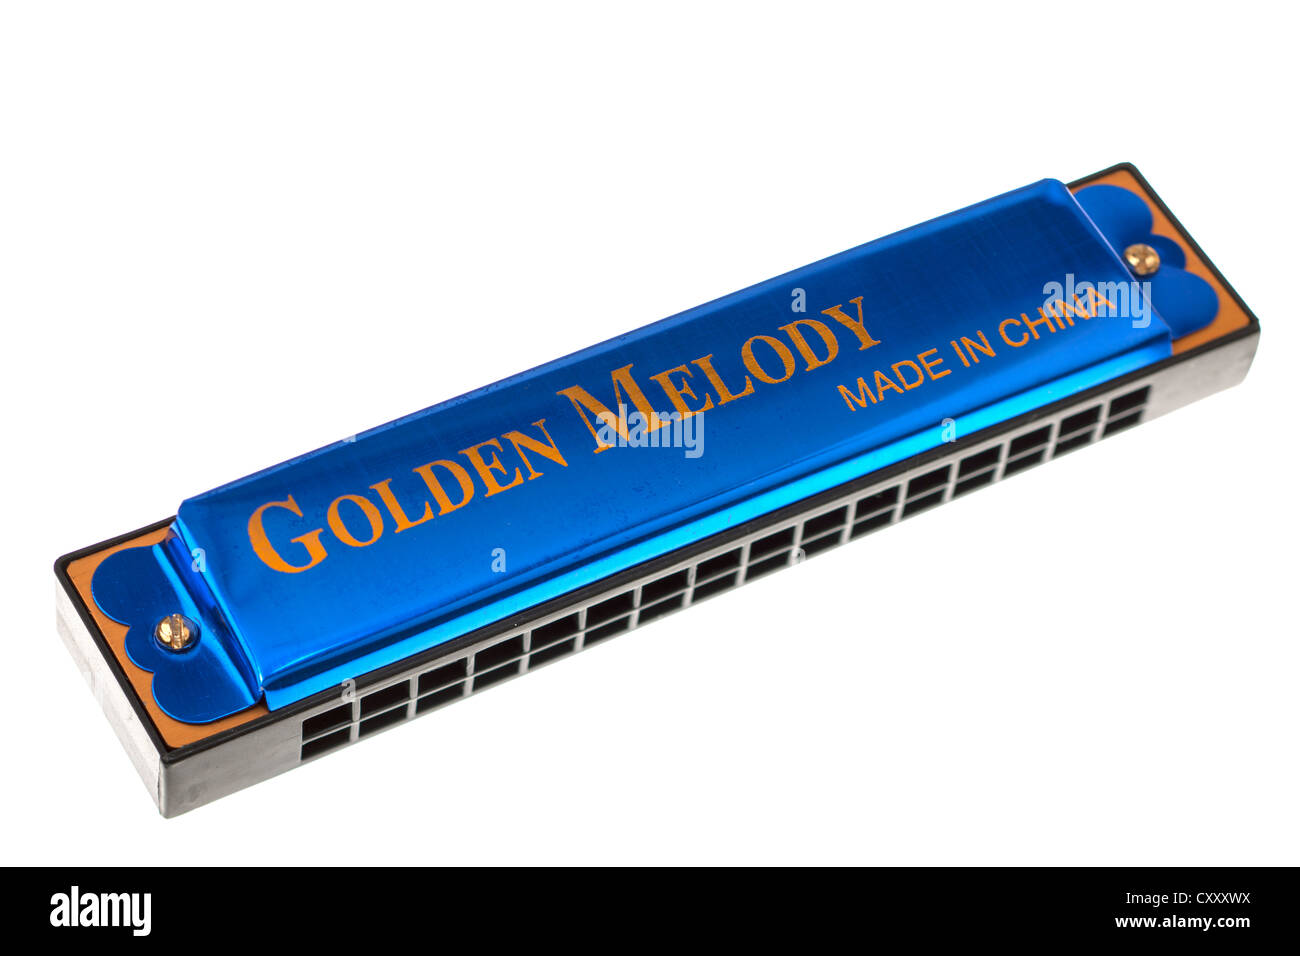 16 hole harmonica Golden Melody made in China Stock Photo